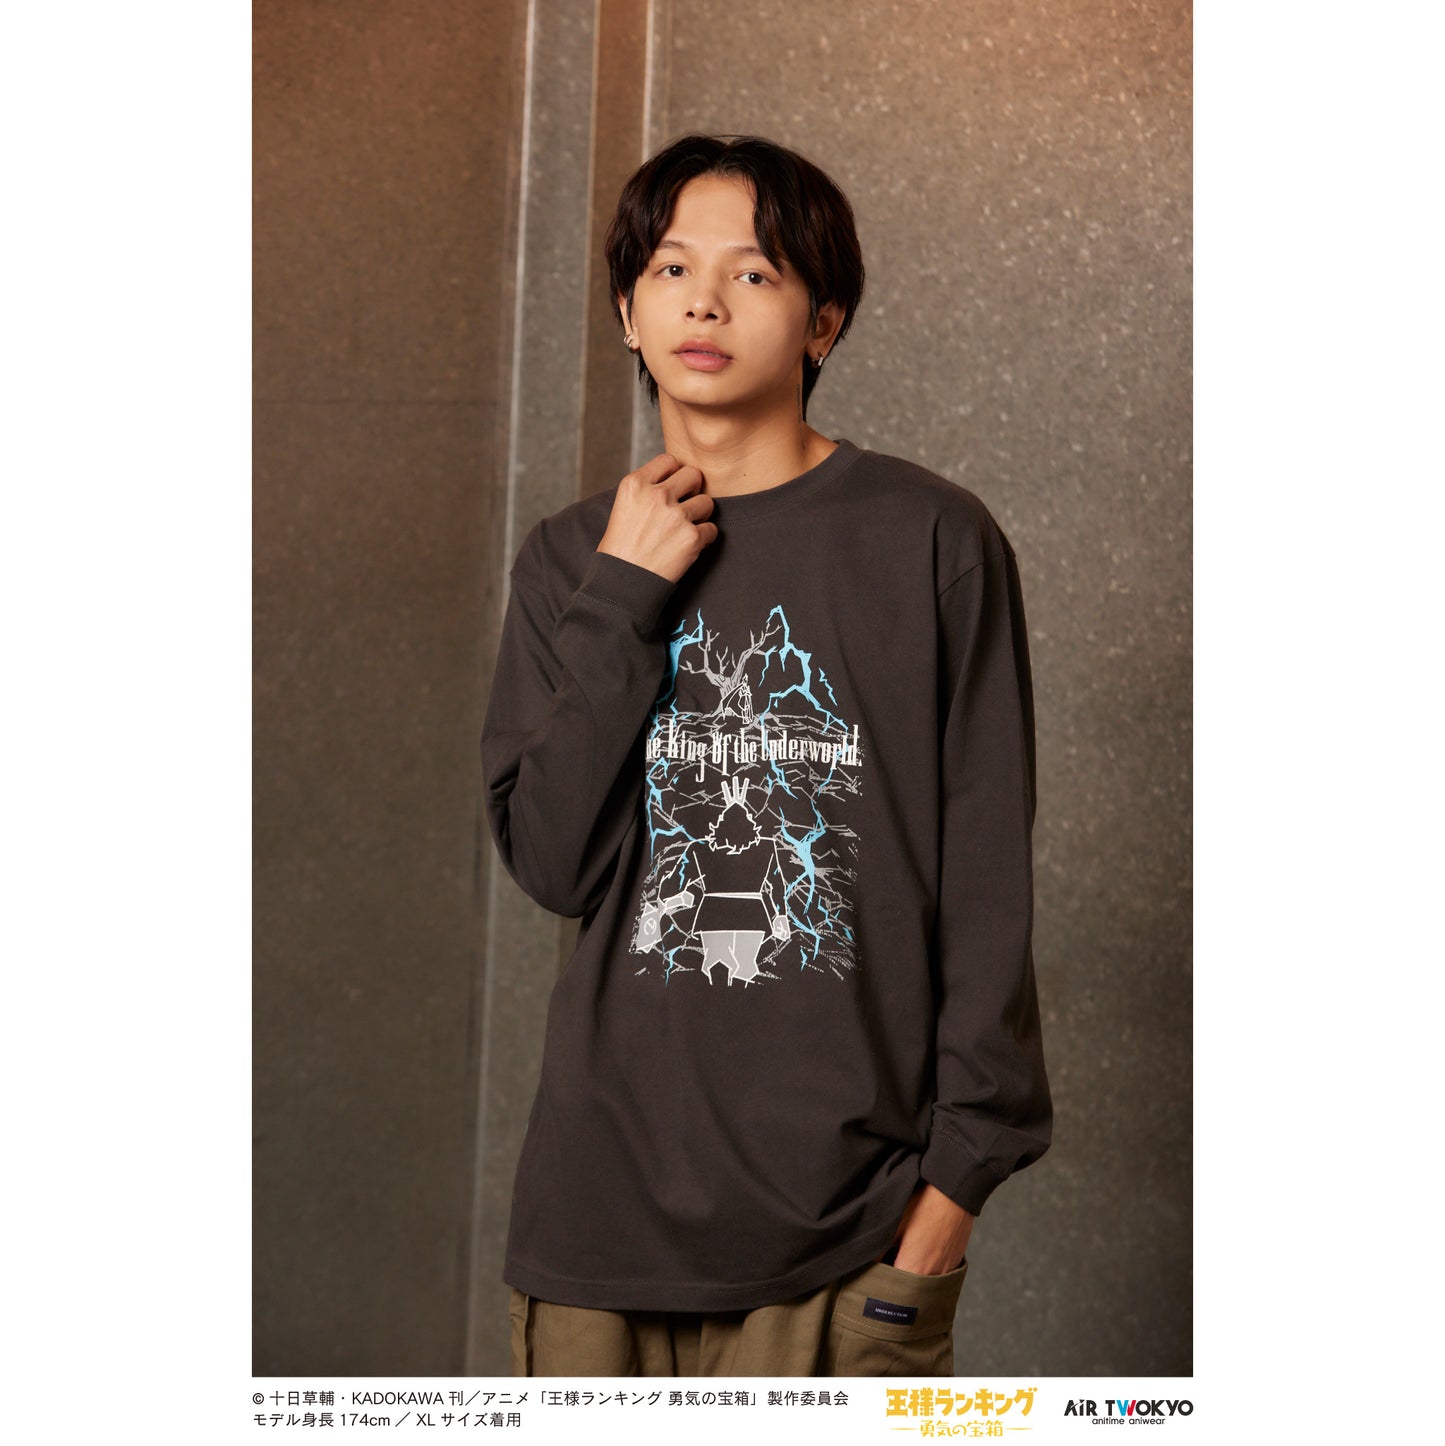 “Ranking of Kings: The Treasure Chest of Courage” scene illustration long sleeve T-shirt 1